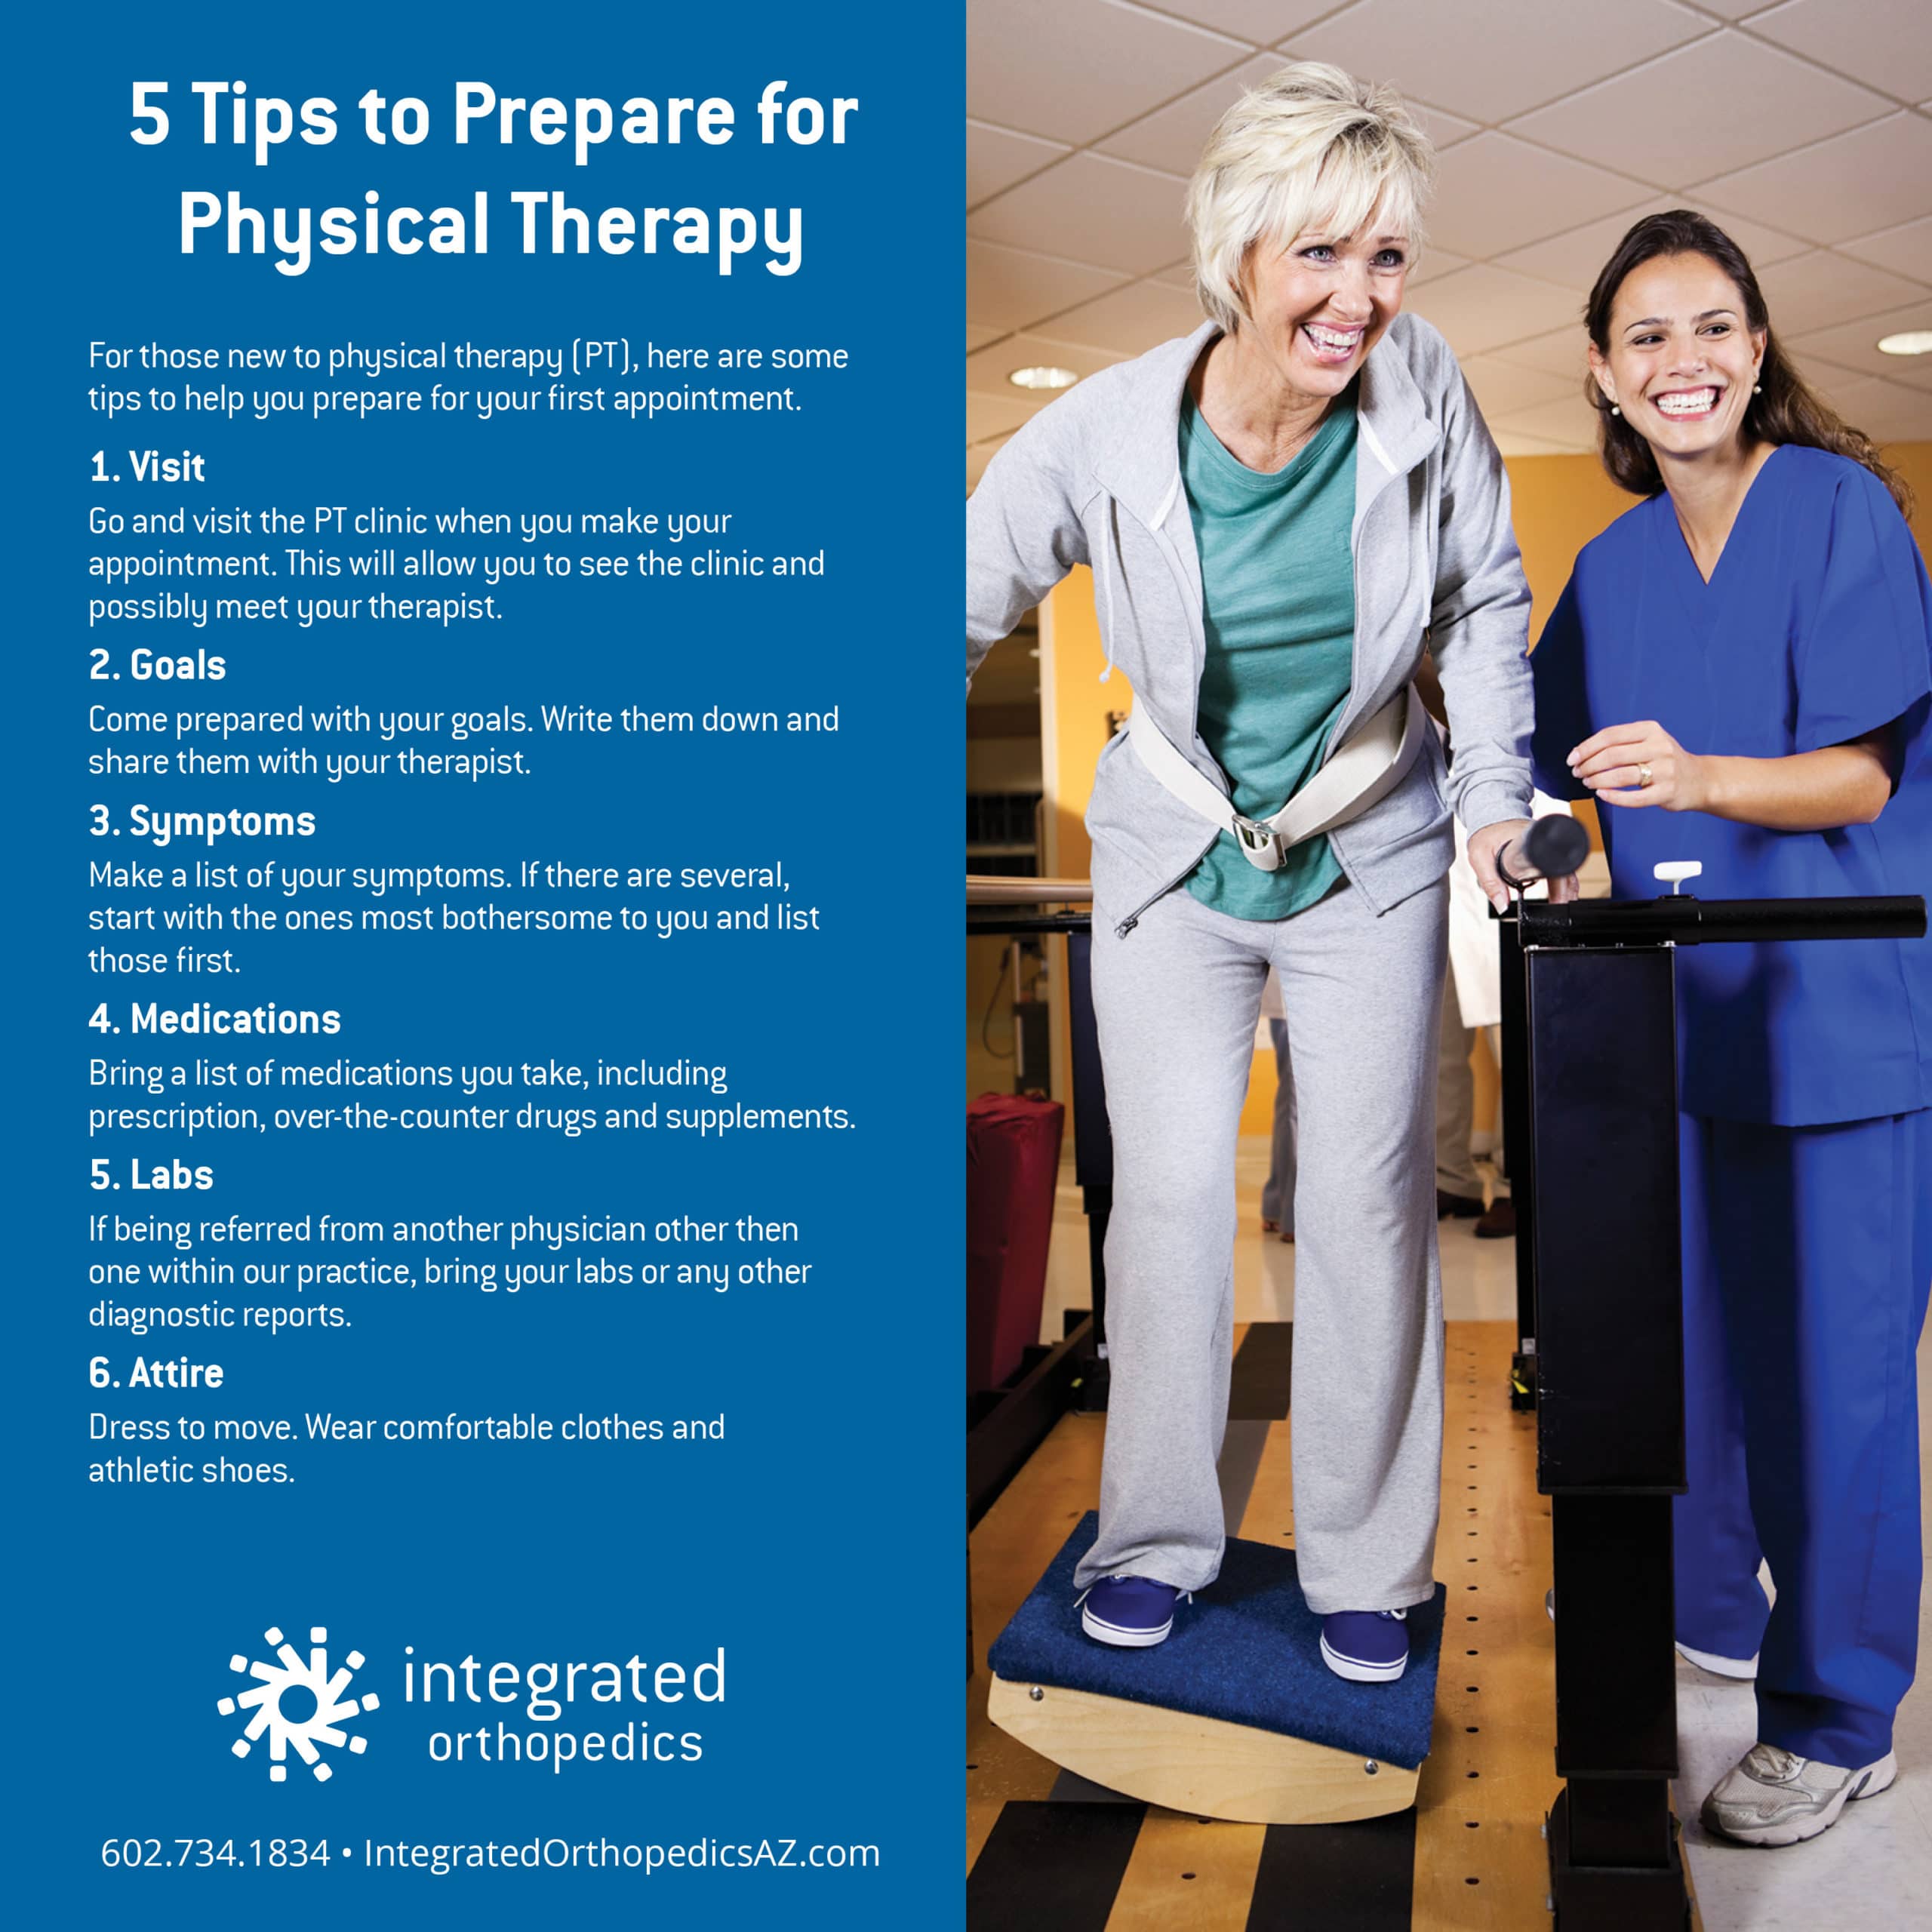 What to Wear to Your Physical Therapy Appointment